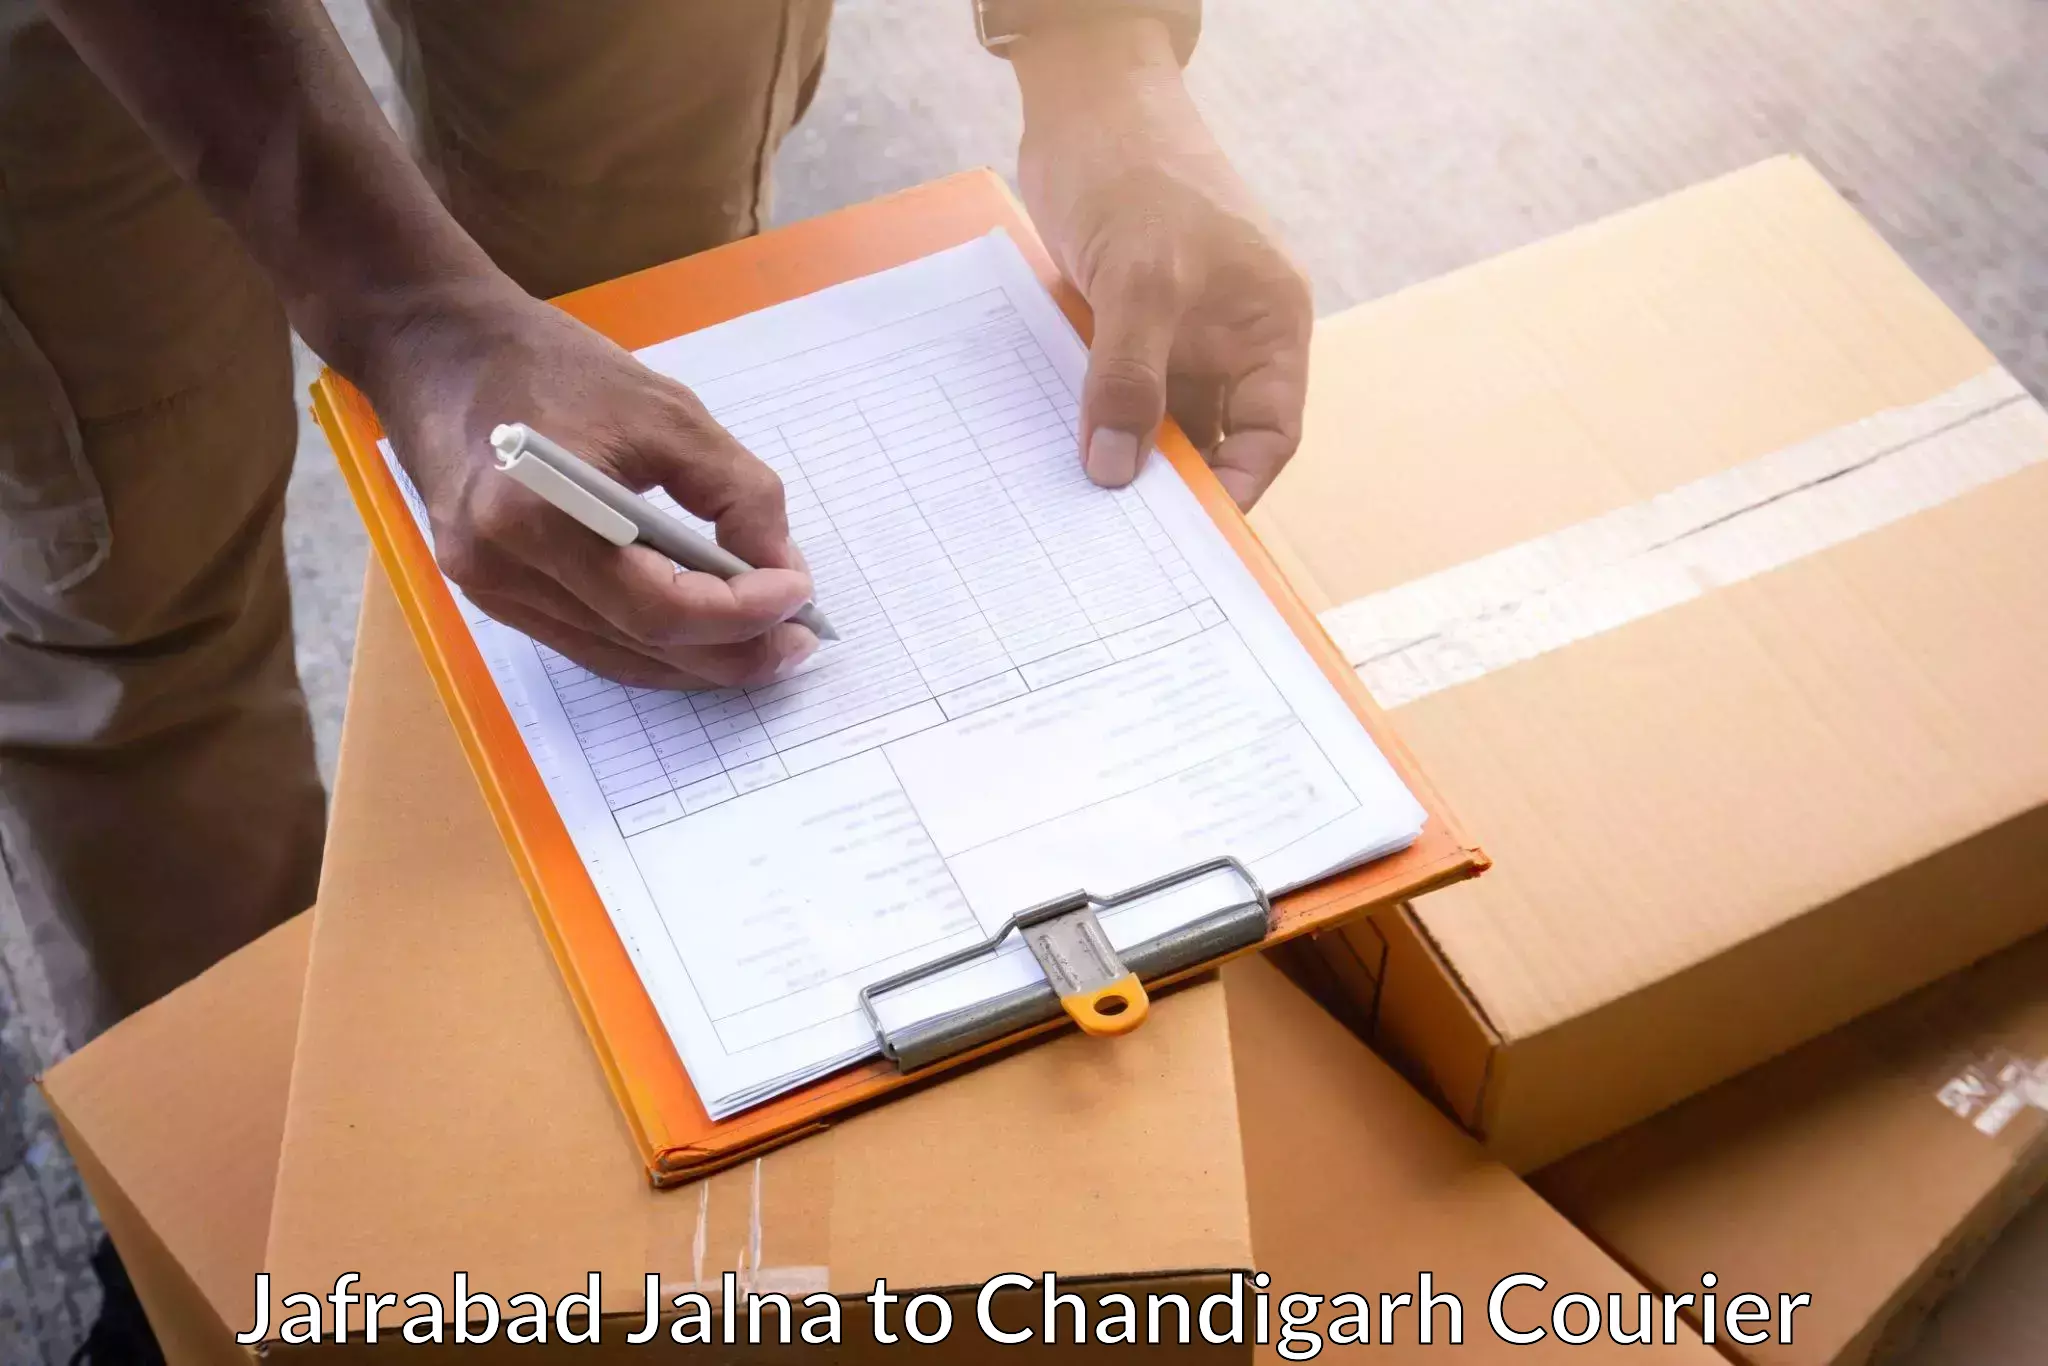 On-call courier service Jafrabad Jalna to Kharar